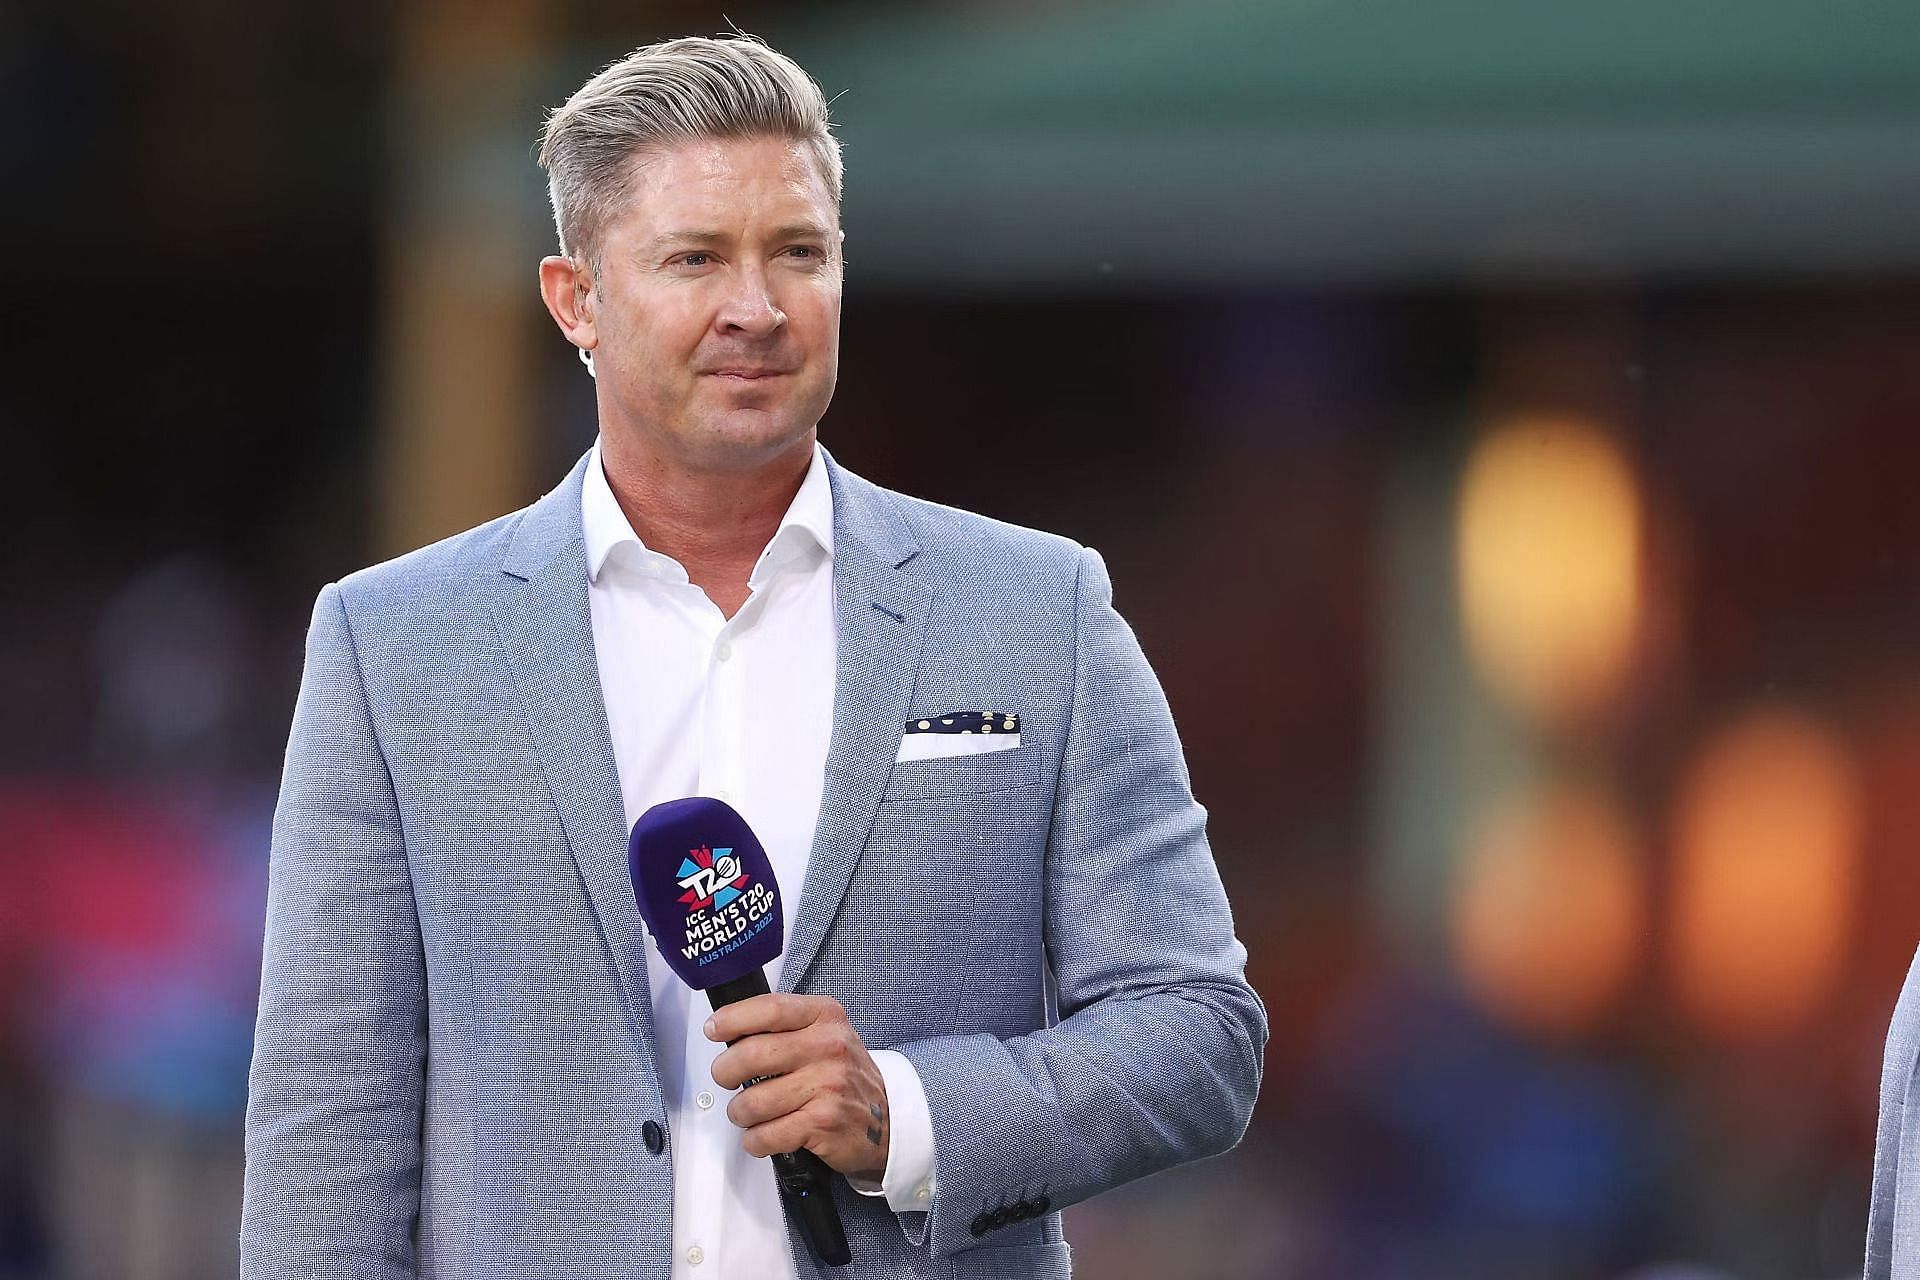 Michael Clarke is not a part of the commentary panel for the 2023 World Cup